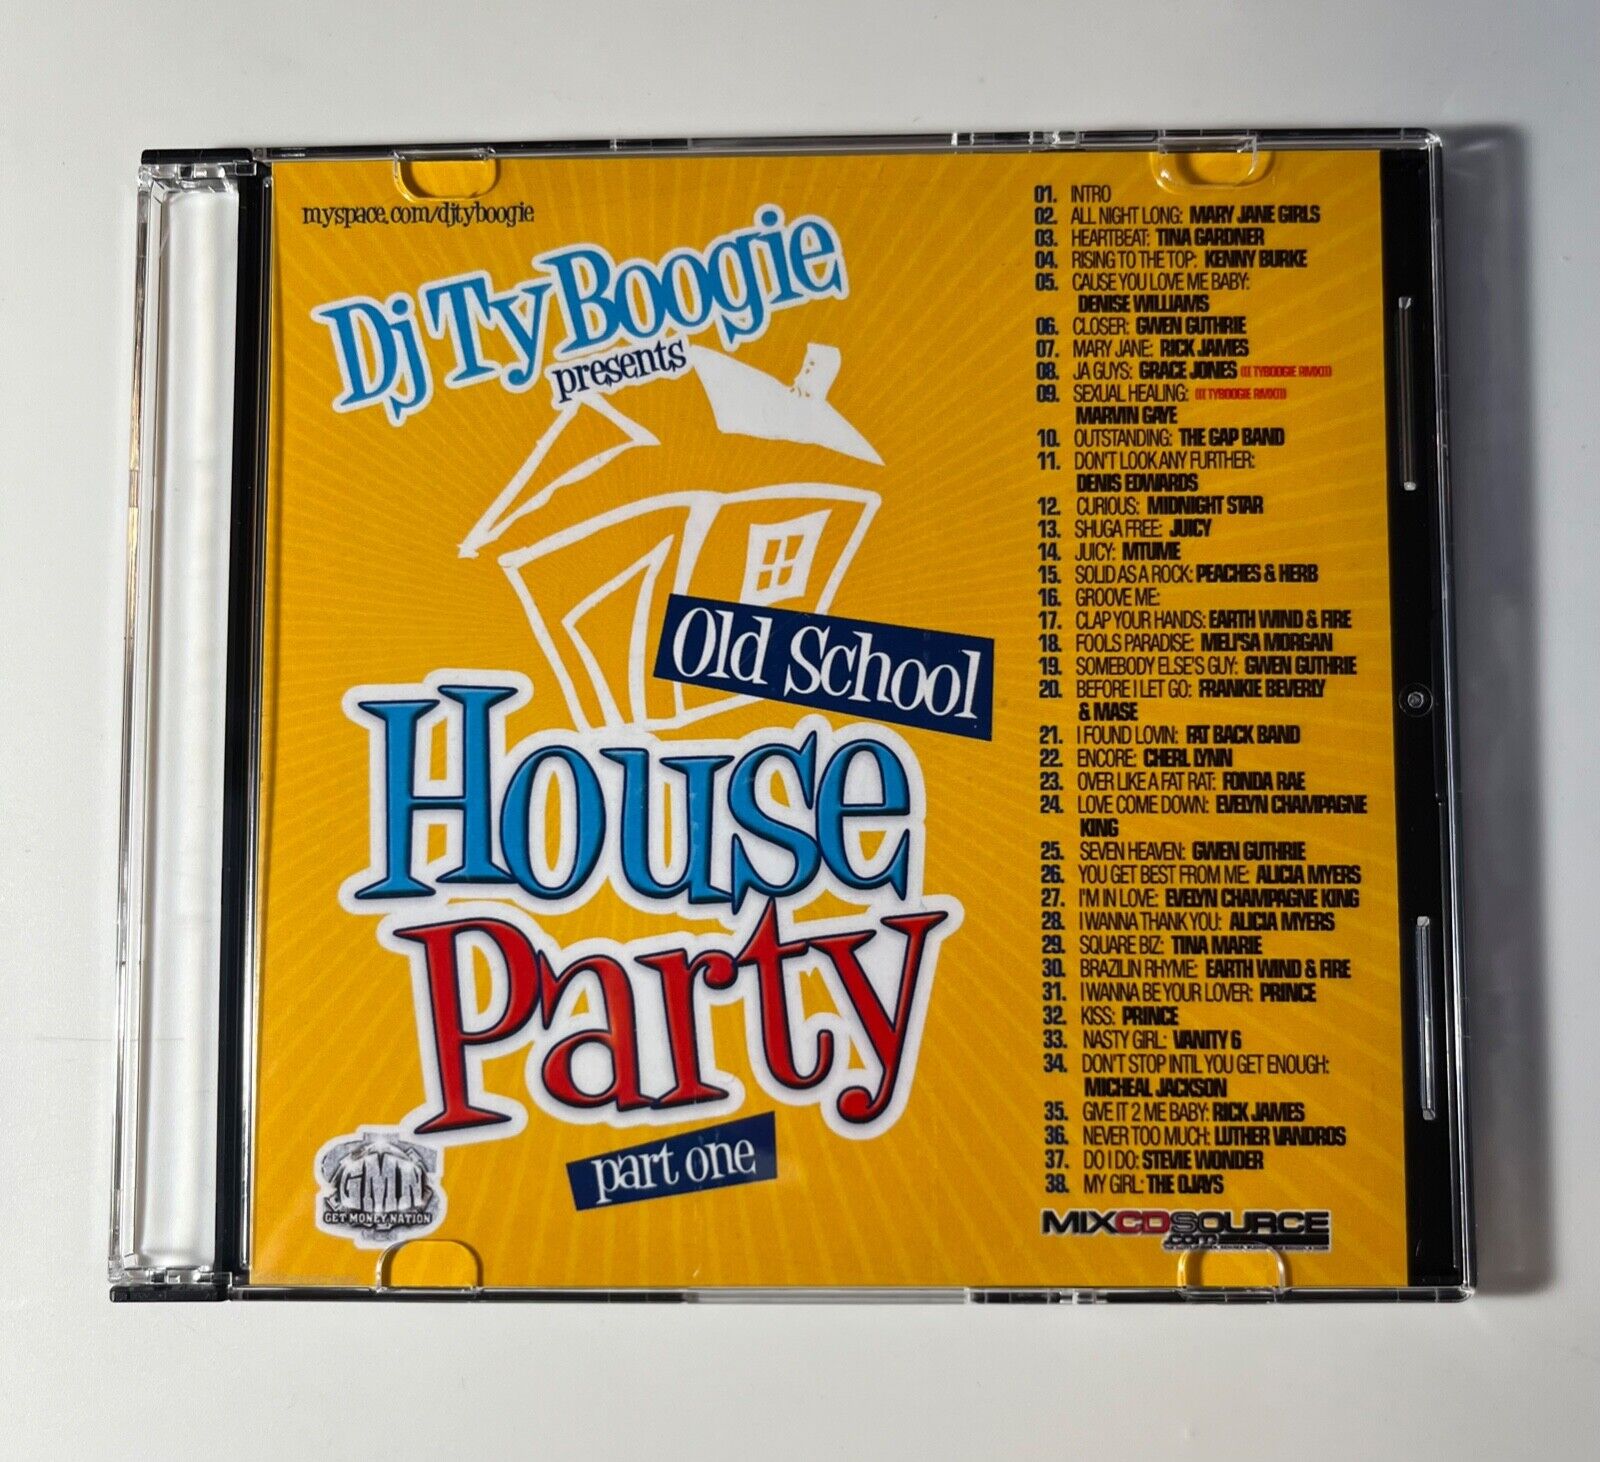 DJ TY BOOGIE OLD SCHOOL HOUSE PARTY NYC PROMO MIXTAPE MIX CD